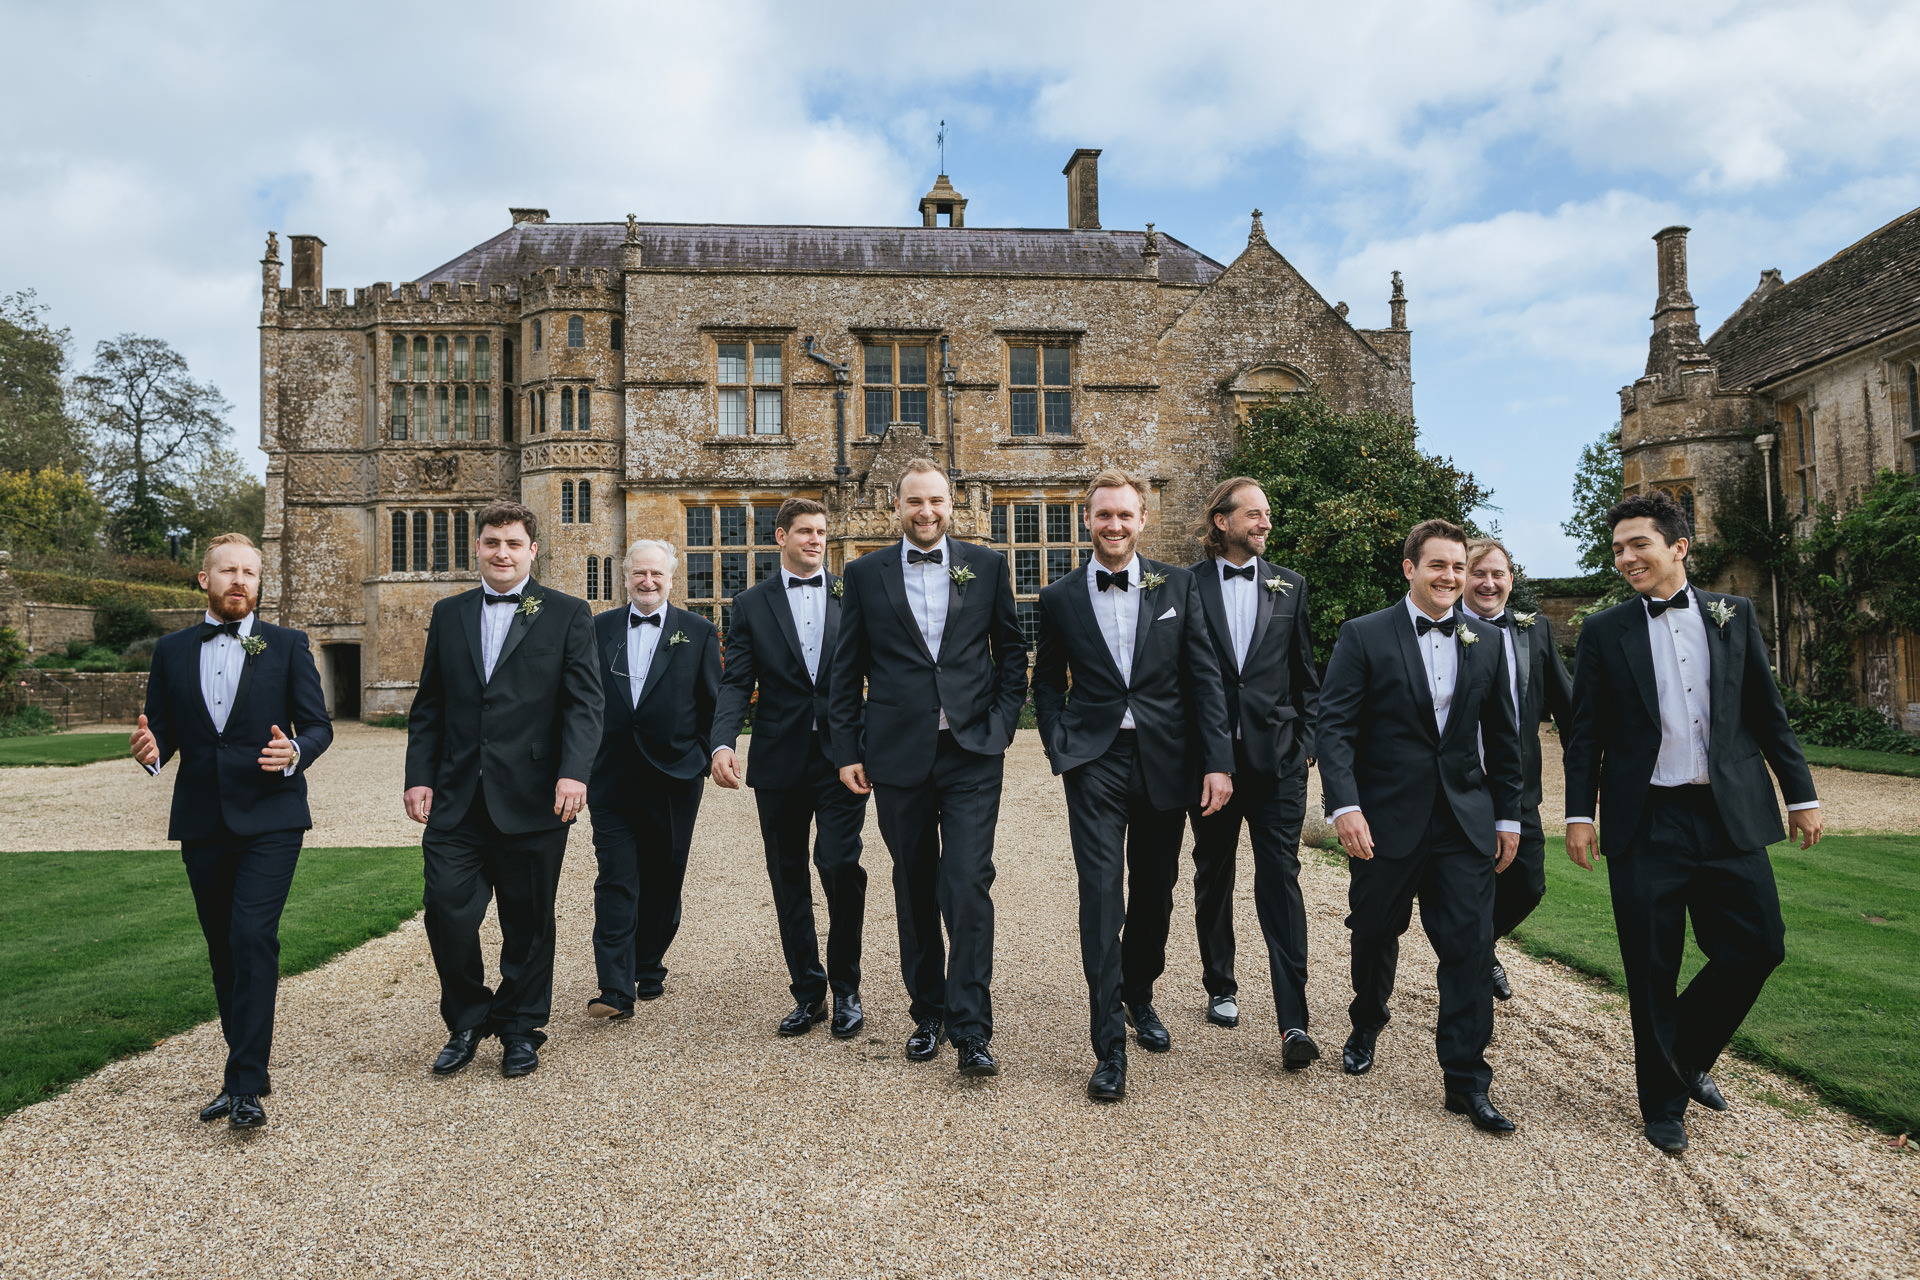 Groom and groomsmen in black tie walking down the drive in front of big country house